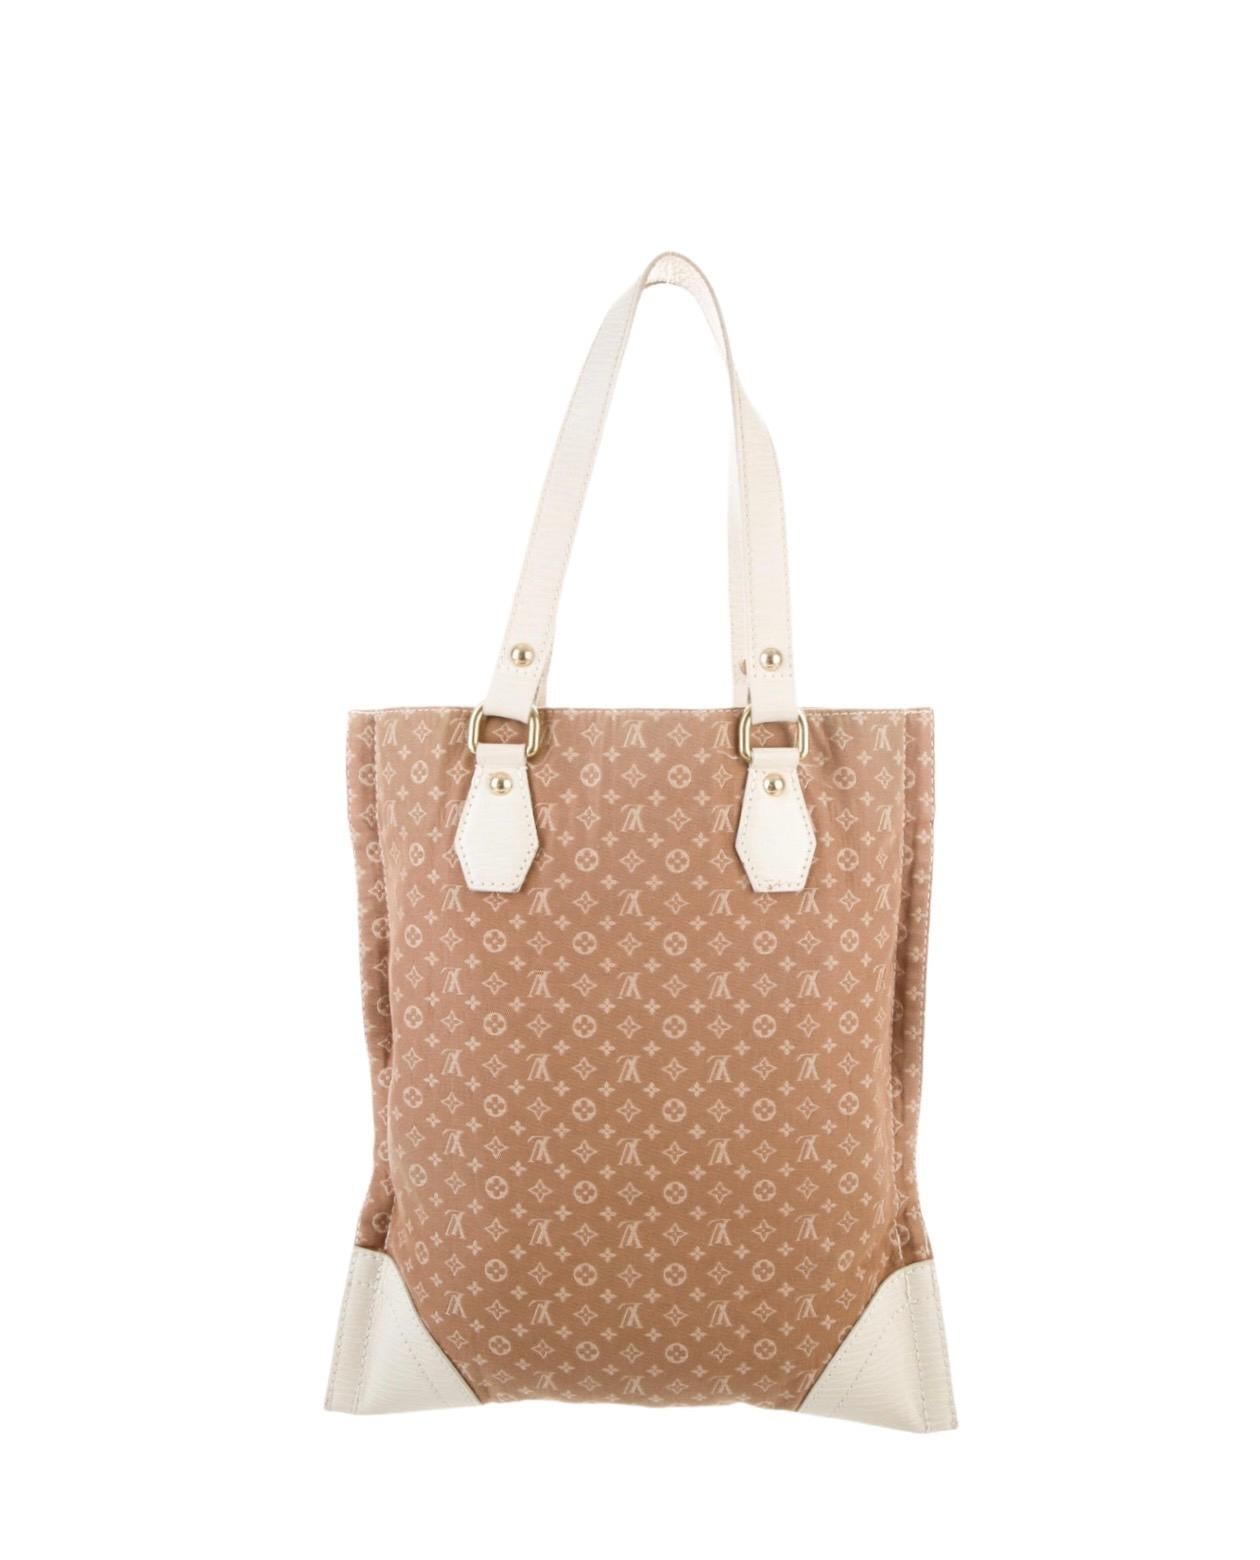 Rare LOUIS VUITTON Beige Monogram Canvas LV Logo Printed Shoulder Tote Bag In Excellent Condition For Sale In Switzerland, CH